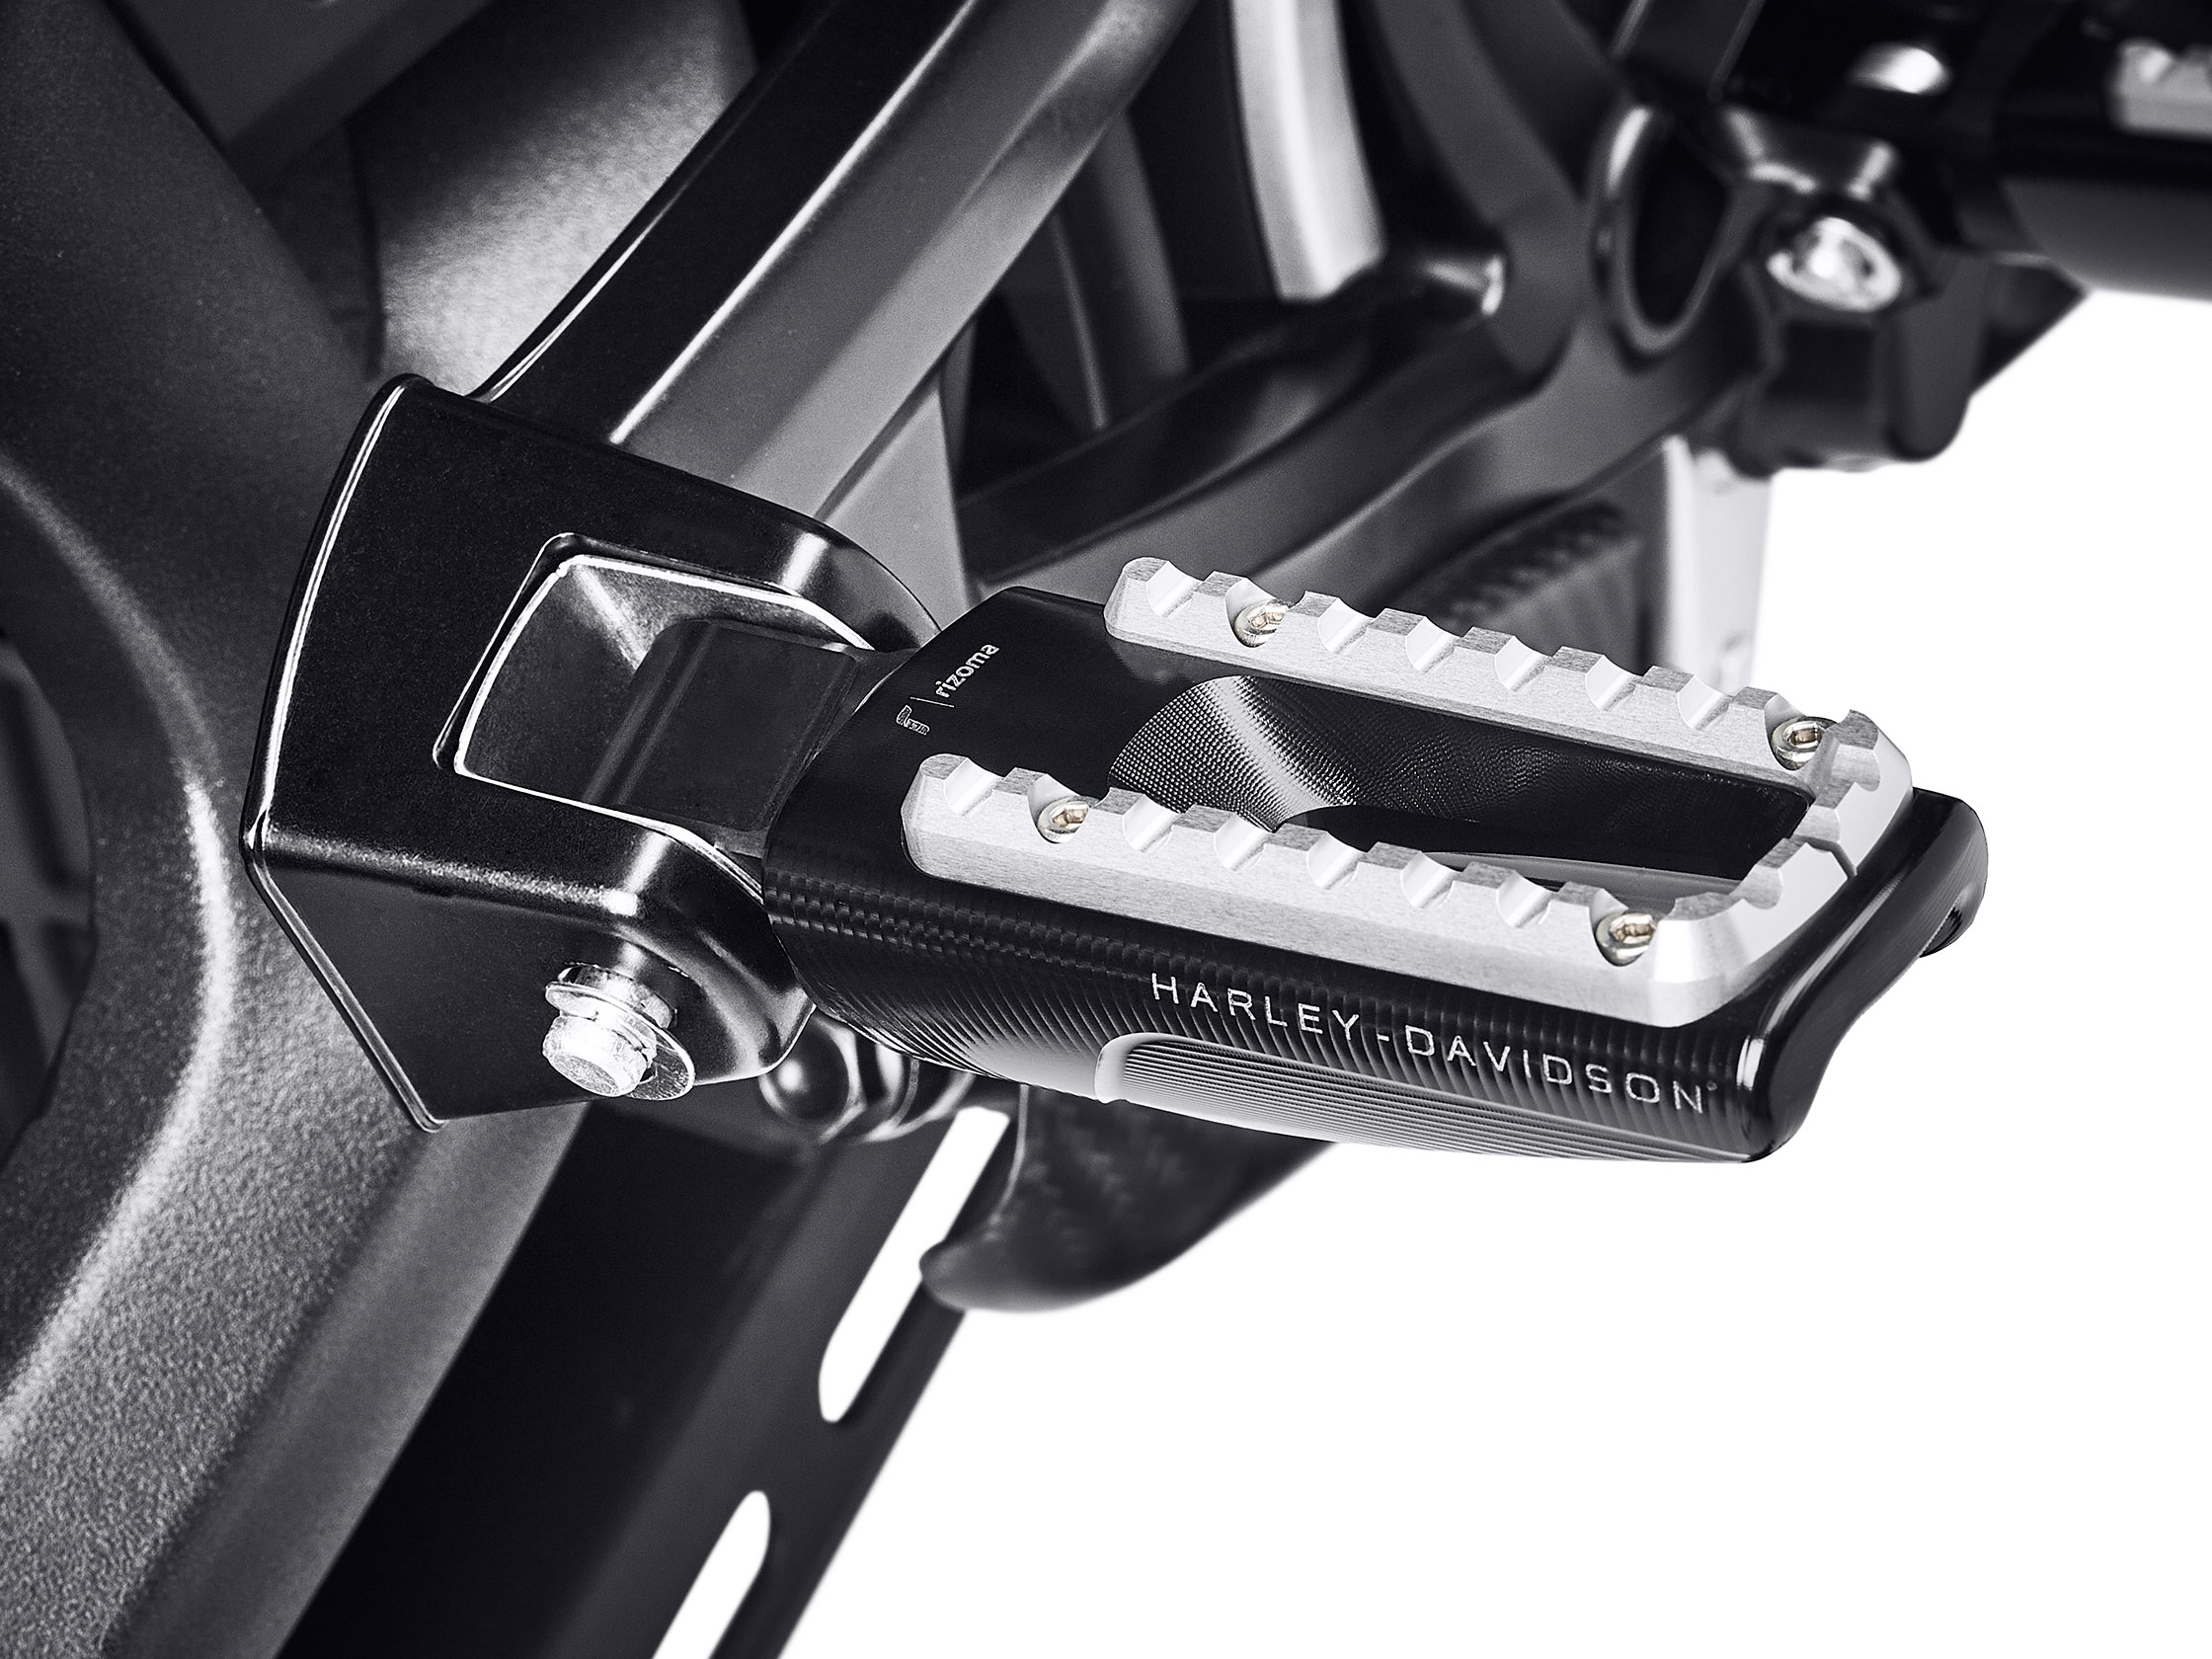 HARLEY-DAVIDSON BY RIZOMA® PASSENGER FOOTPEGS 50502159 / Footpegs /  Multi-fit / Parts & Accessories / - House-of-Flames Harley-Davidson